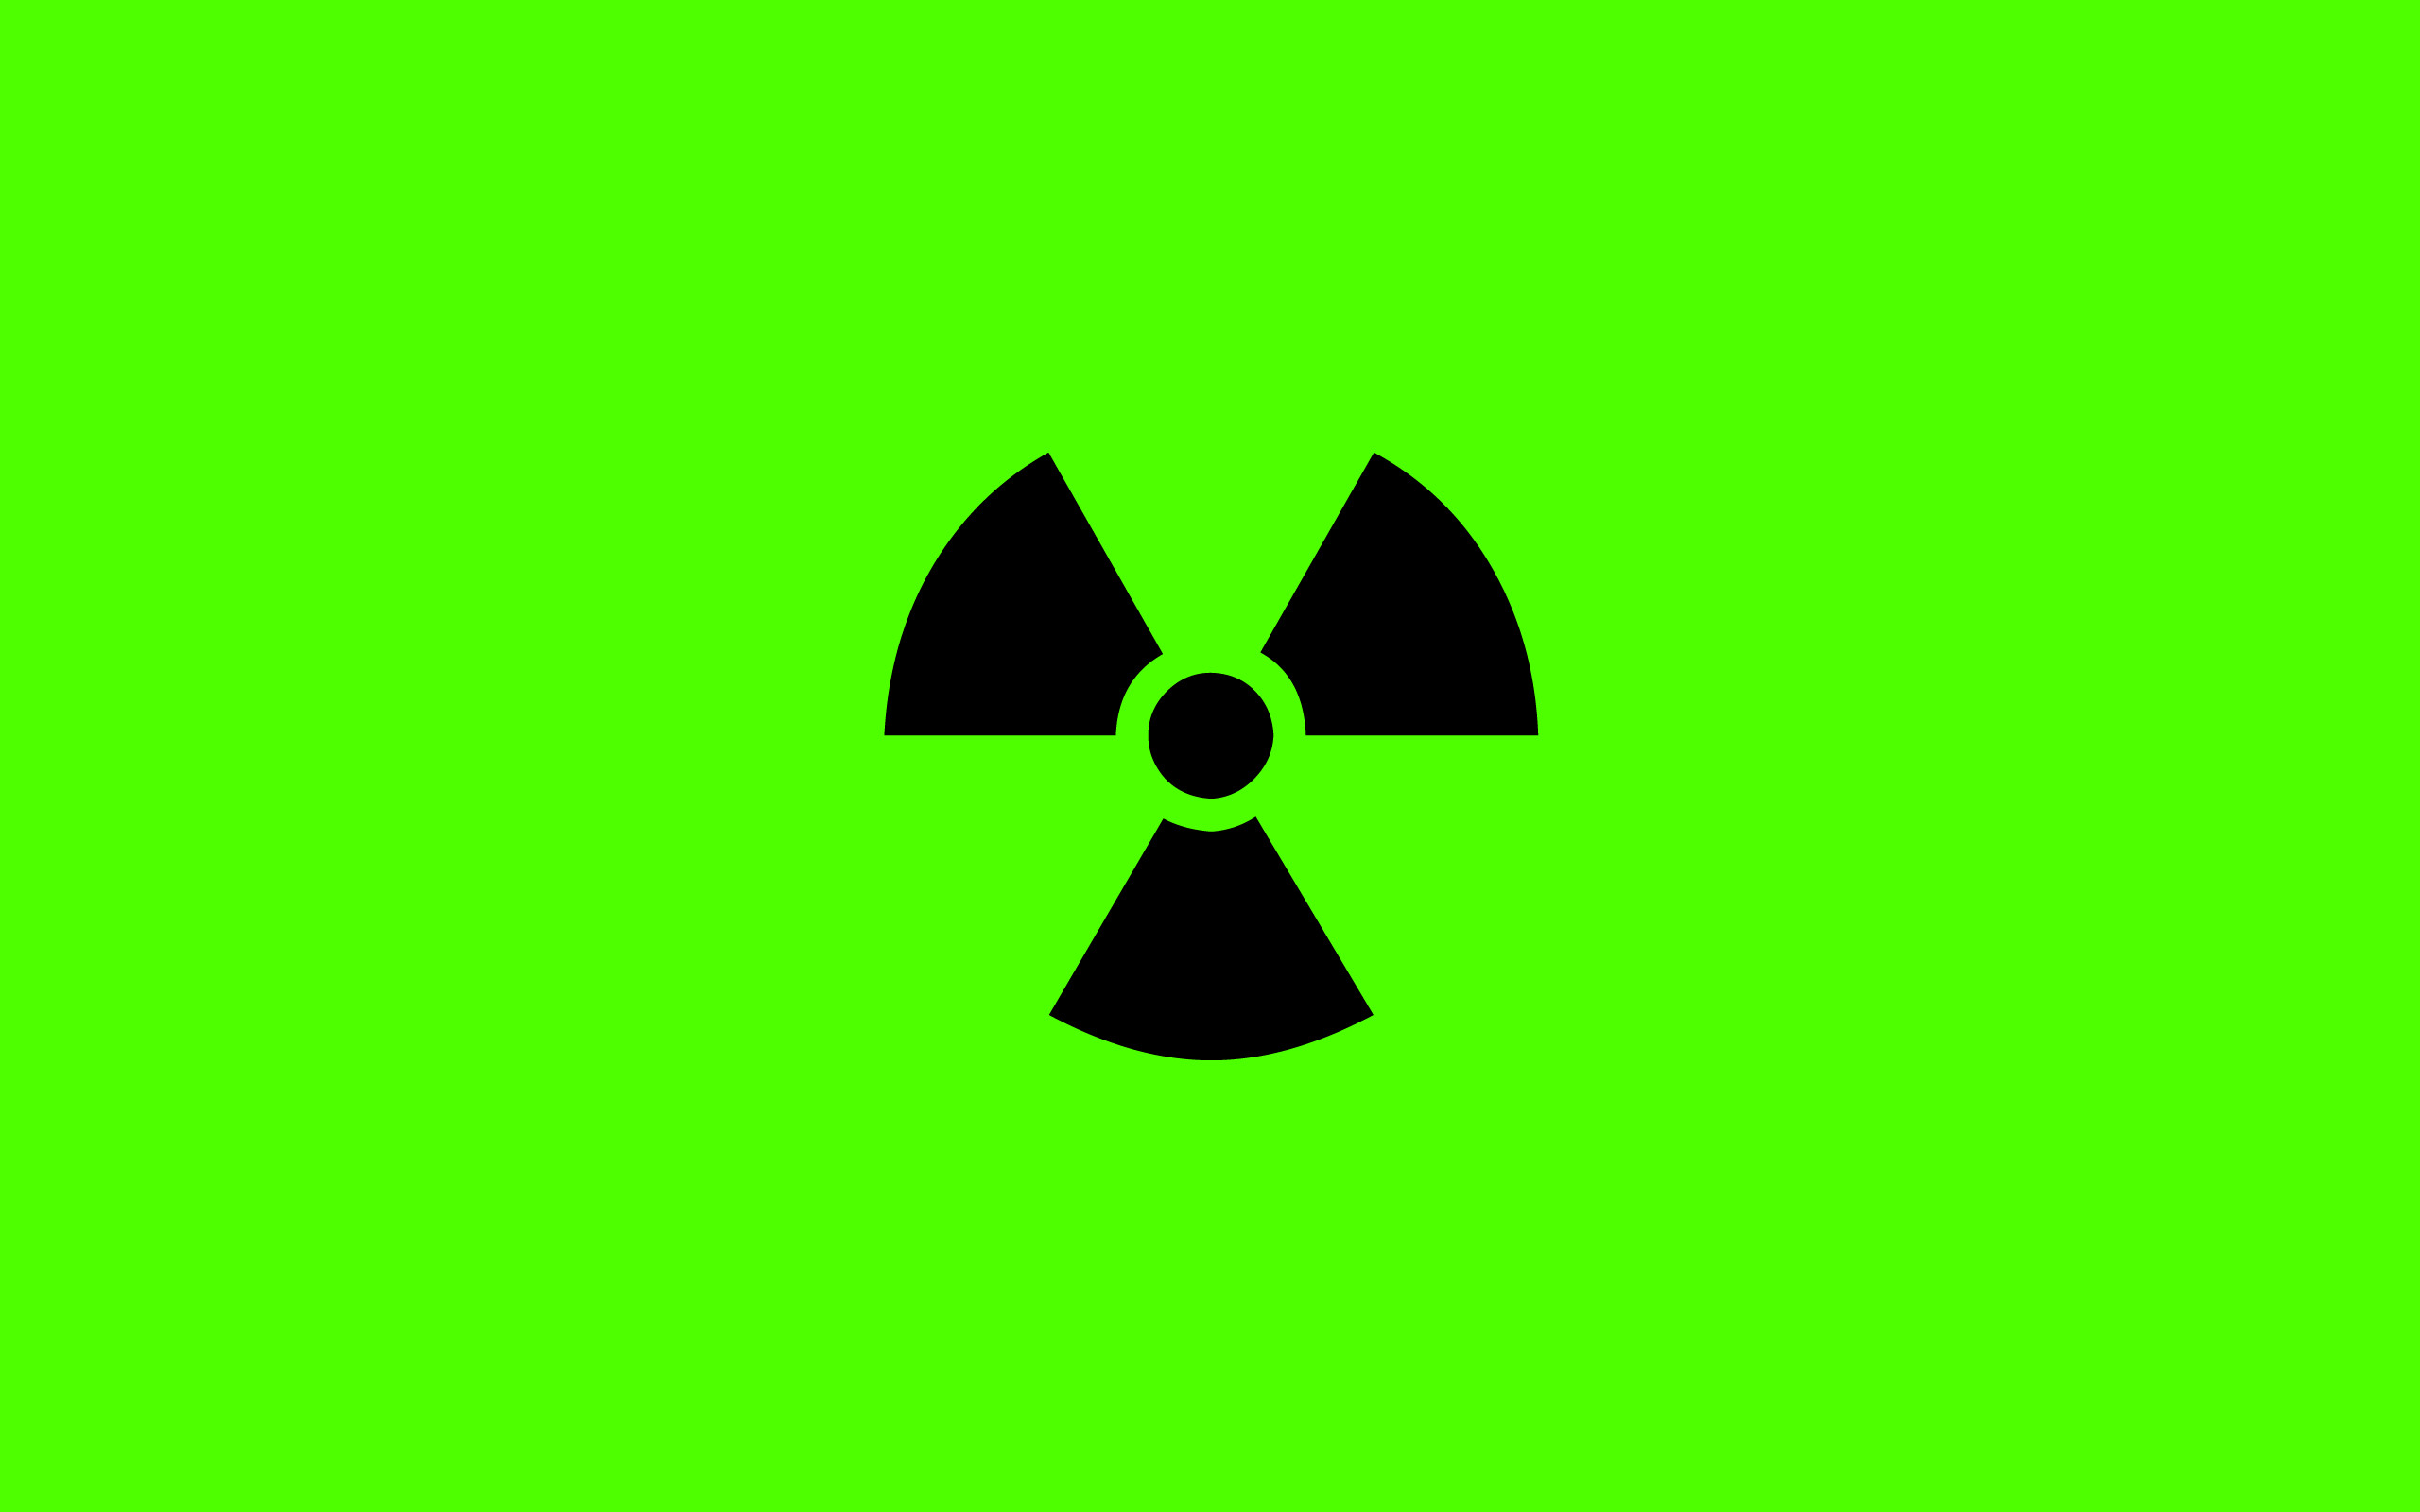 2560x1600 Radioactive by brianlechthaler Radioactive by brianlechthaler